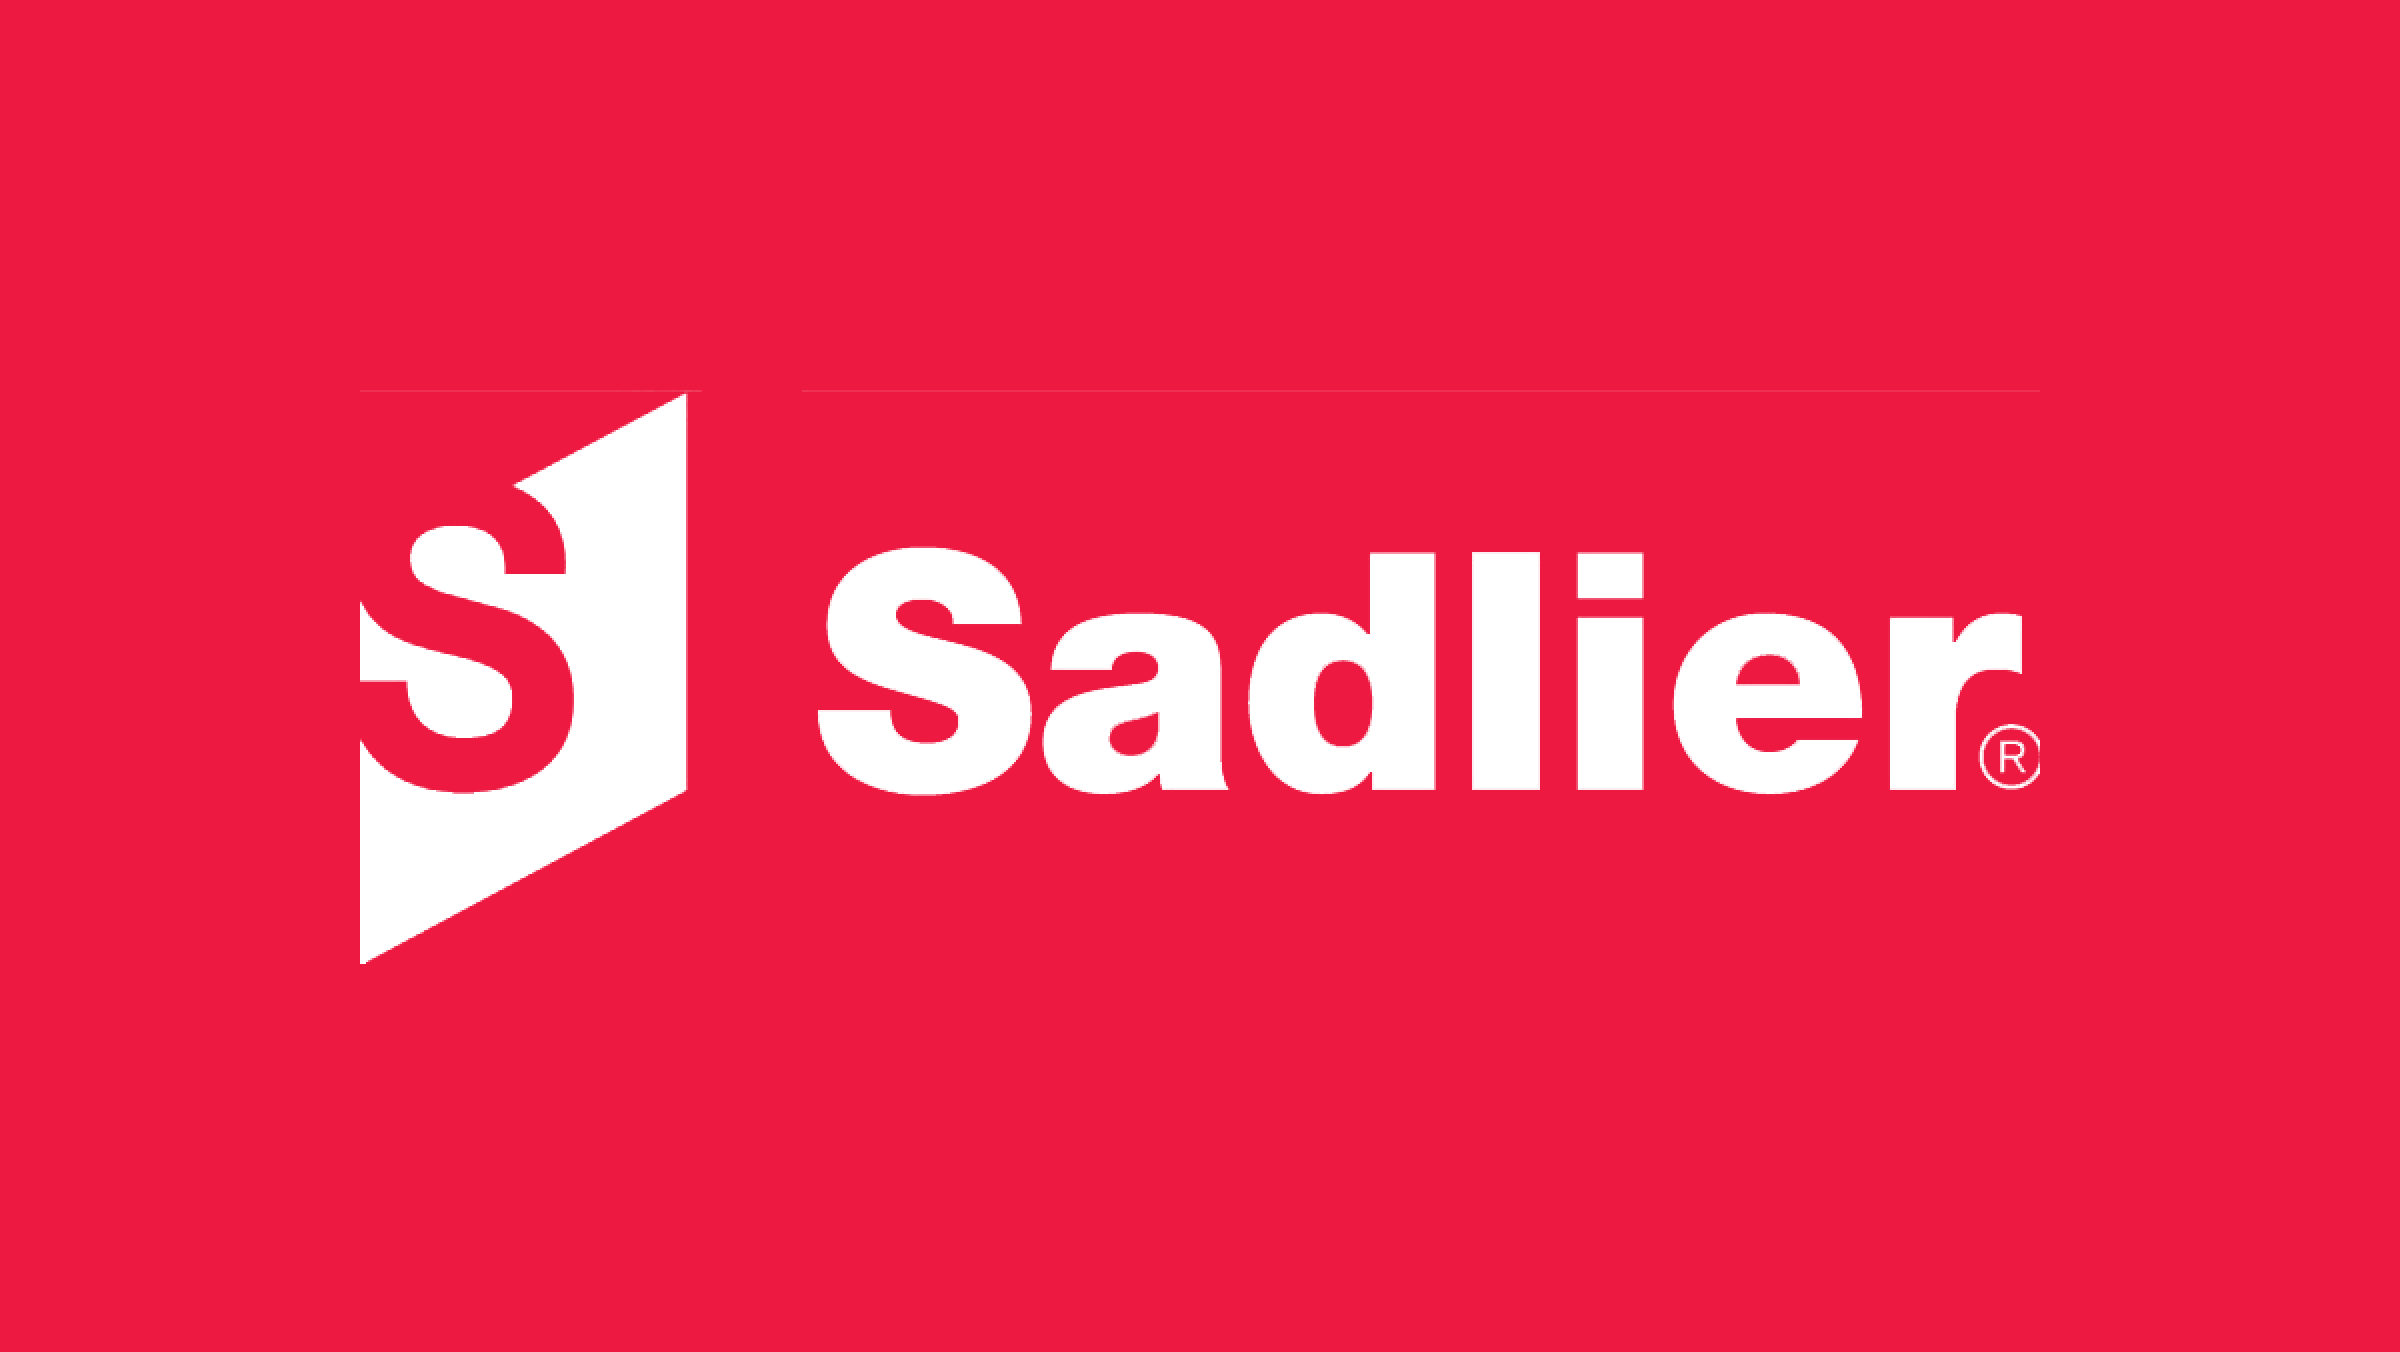 Sadlier Improves Lead Qualification with MultiStep Form Strategy